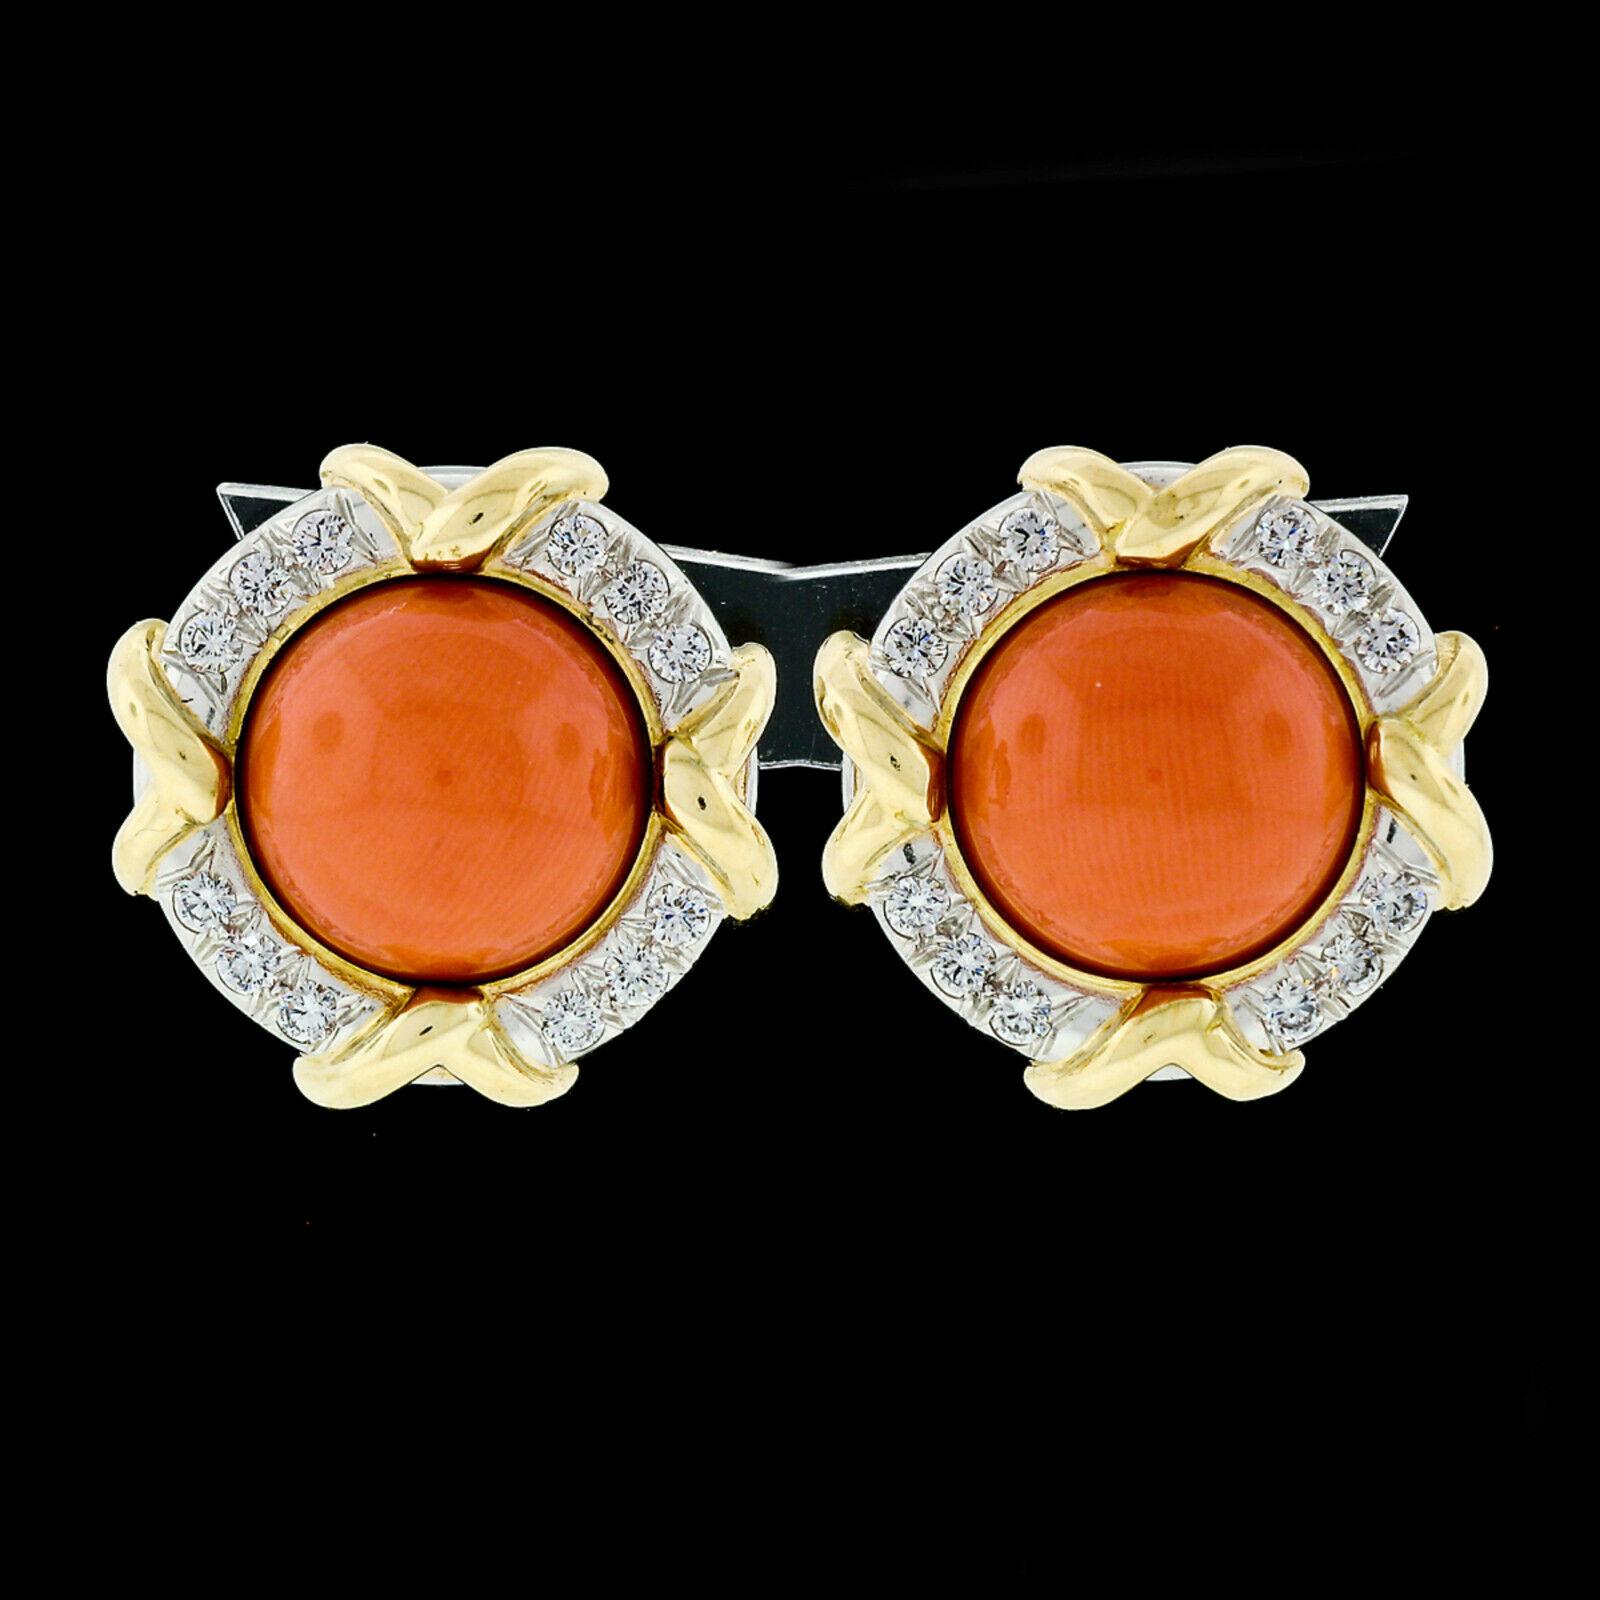 You are looking at a gorgeous pair of earrings that was designed in 1985 and crafted in solid 18k yellow gold and .950 platinum by Tiffany & Co. The earrings feature a pair of GIA certified, round cabochon cut, natural coral stones with a rich and